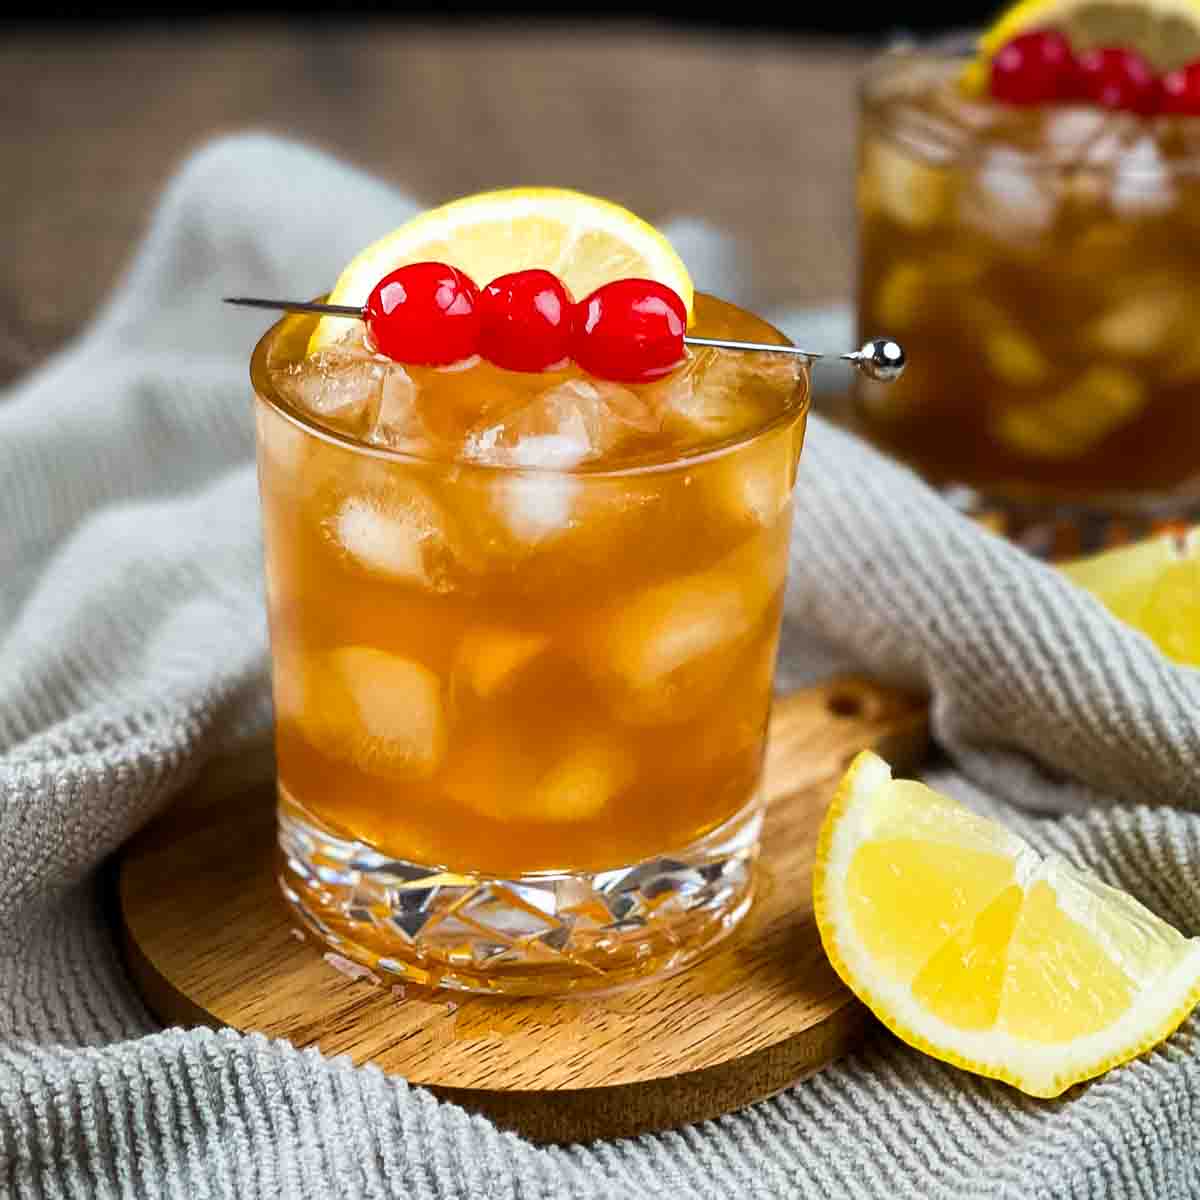 Two glasses of rum sour garnished with a lemon wedge and three maraschino cherries on a serving pick.